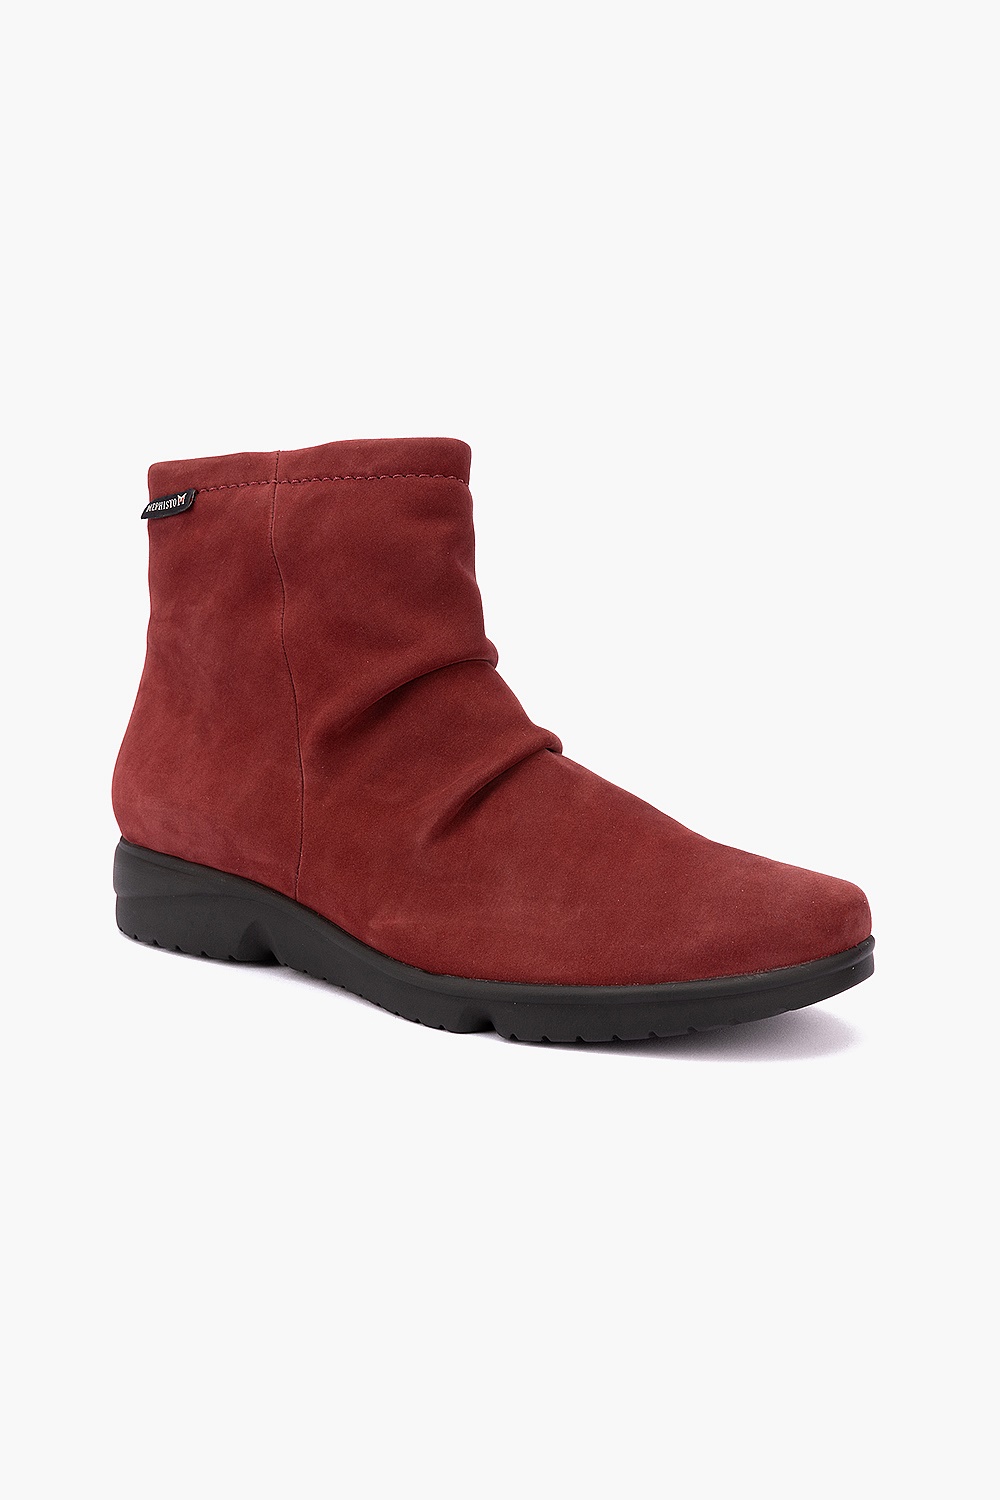 Mephisto Flat Red Suede Leather Chelsea Boots 